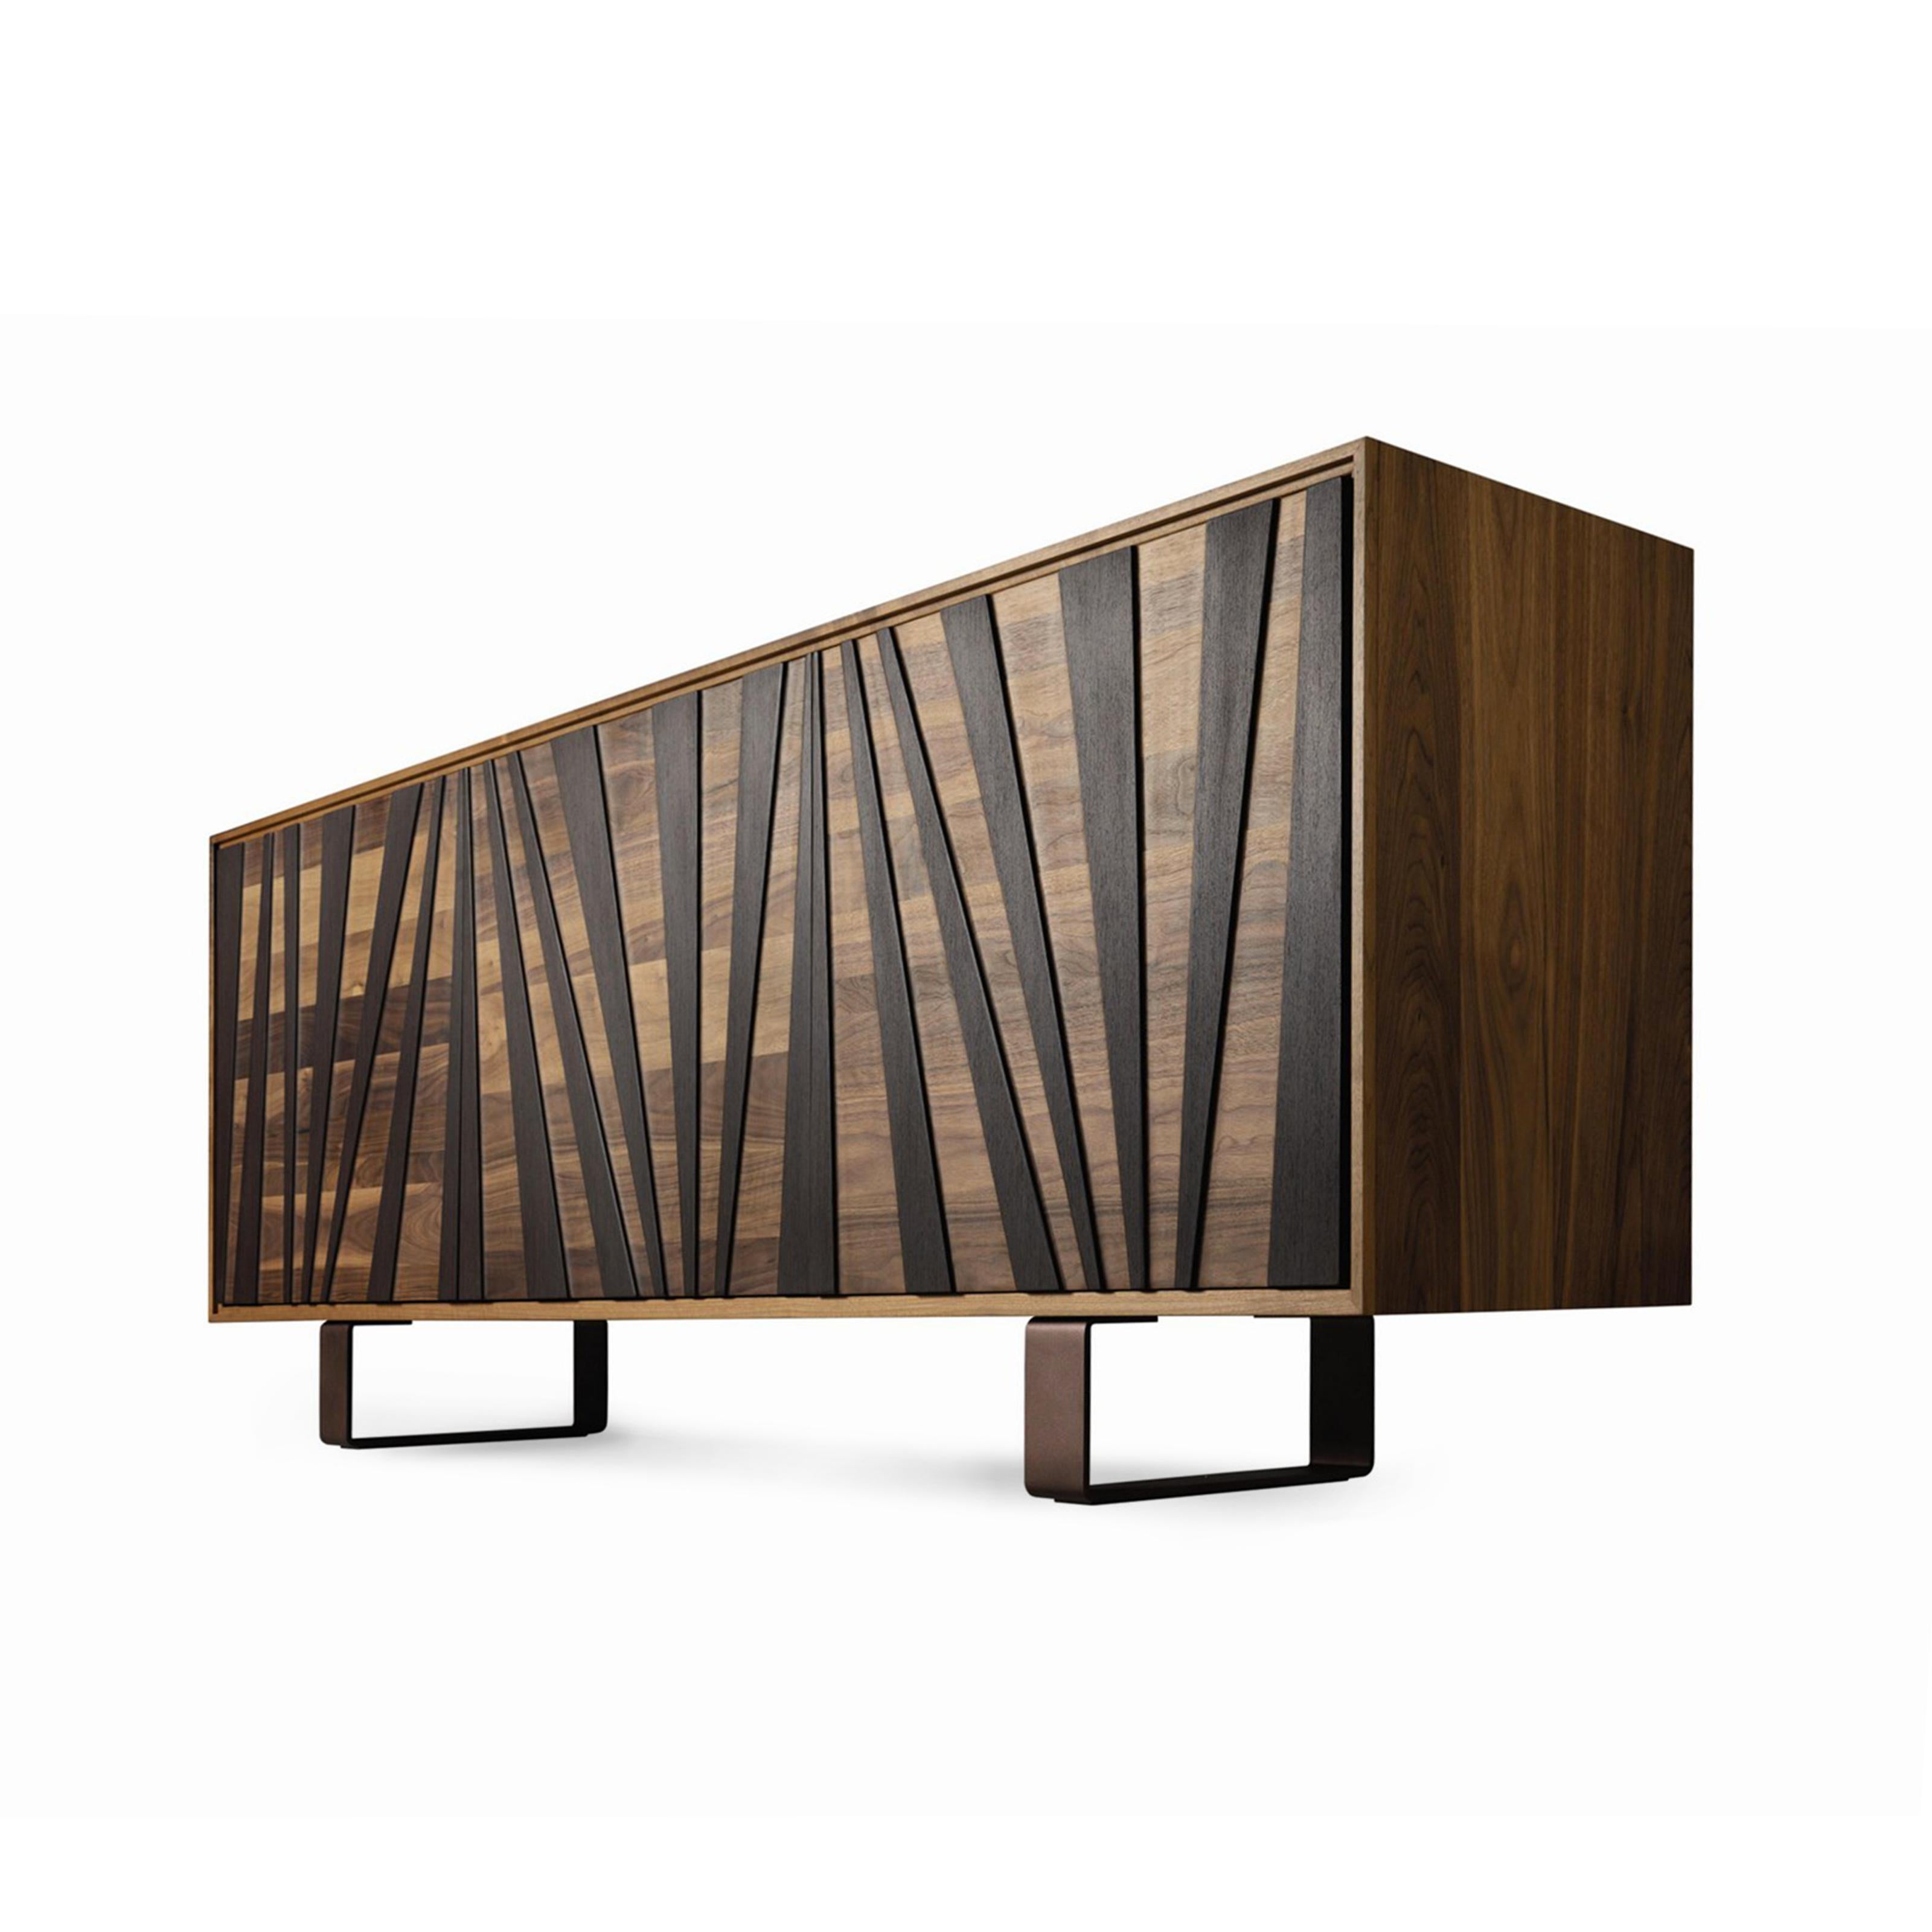 Completely designed and made in Italy, this sideboard it’s an expression of fine Italian craftsmanship. Handcrafted with passion and skills and finished by hand in every detail. The result is a contemporary piece designed to elegantly complete any